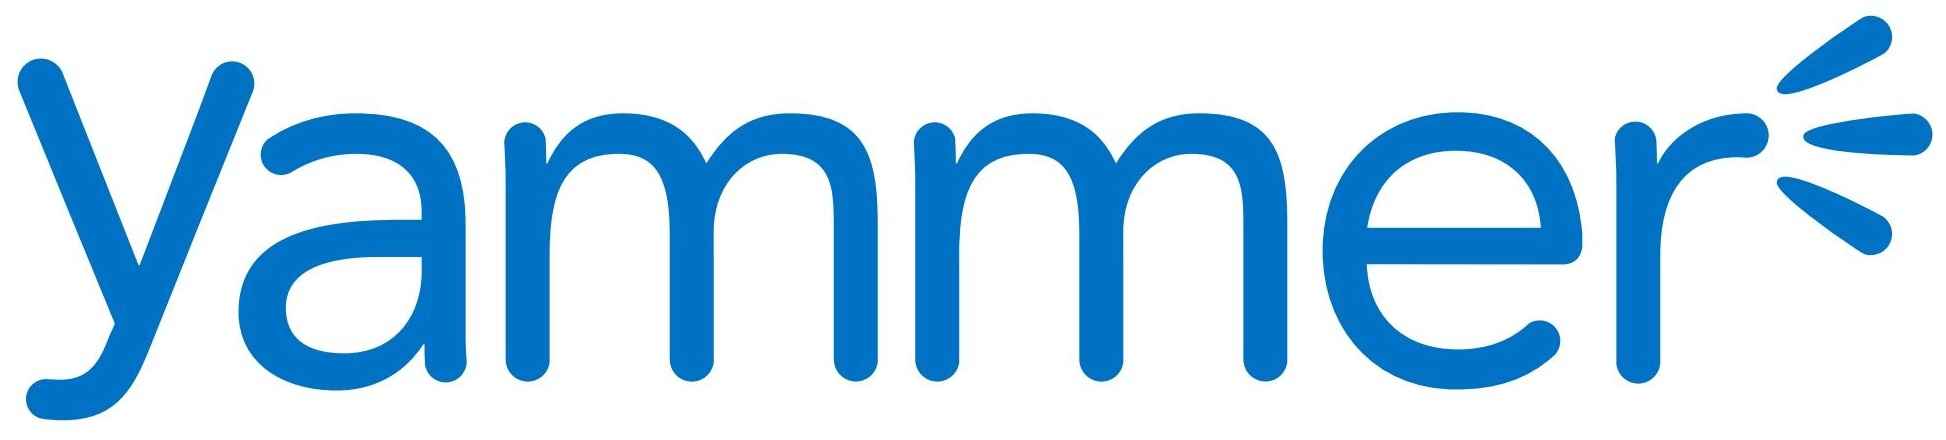 Yammer Logo png